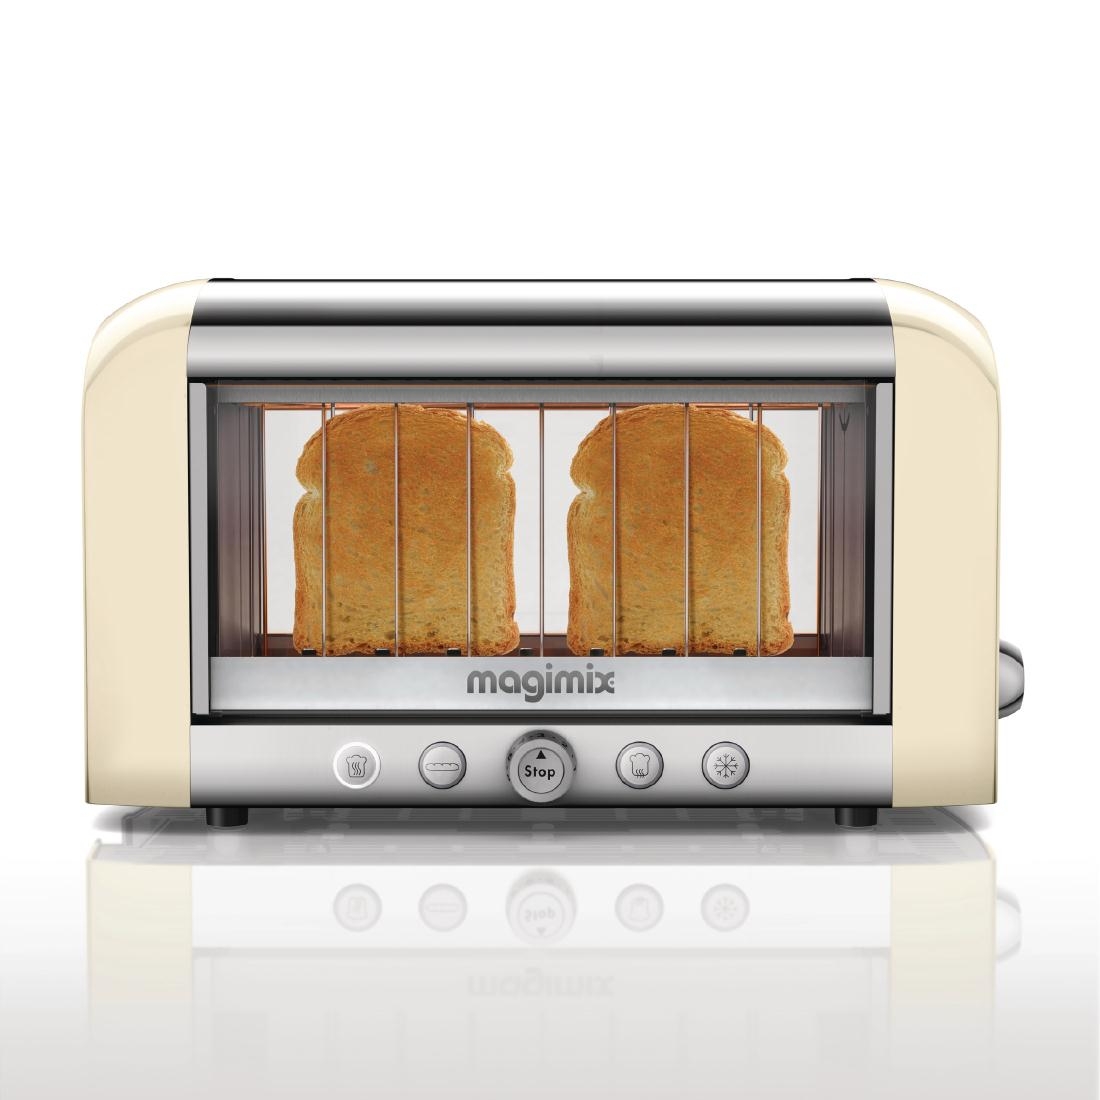 Picture of Magimix 11527LC 2 Slice Vision Toaster - Cream